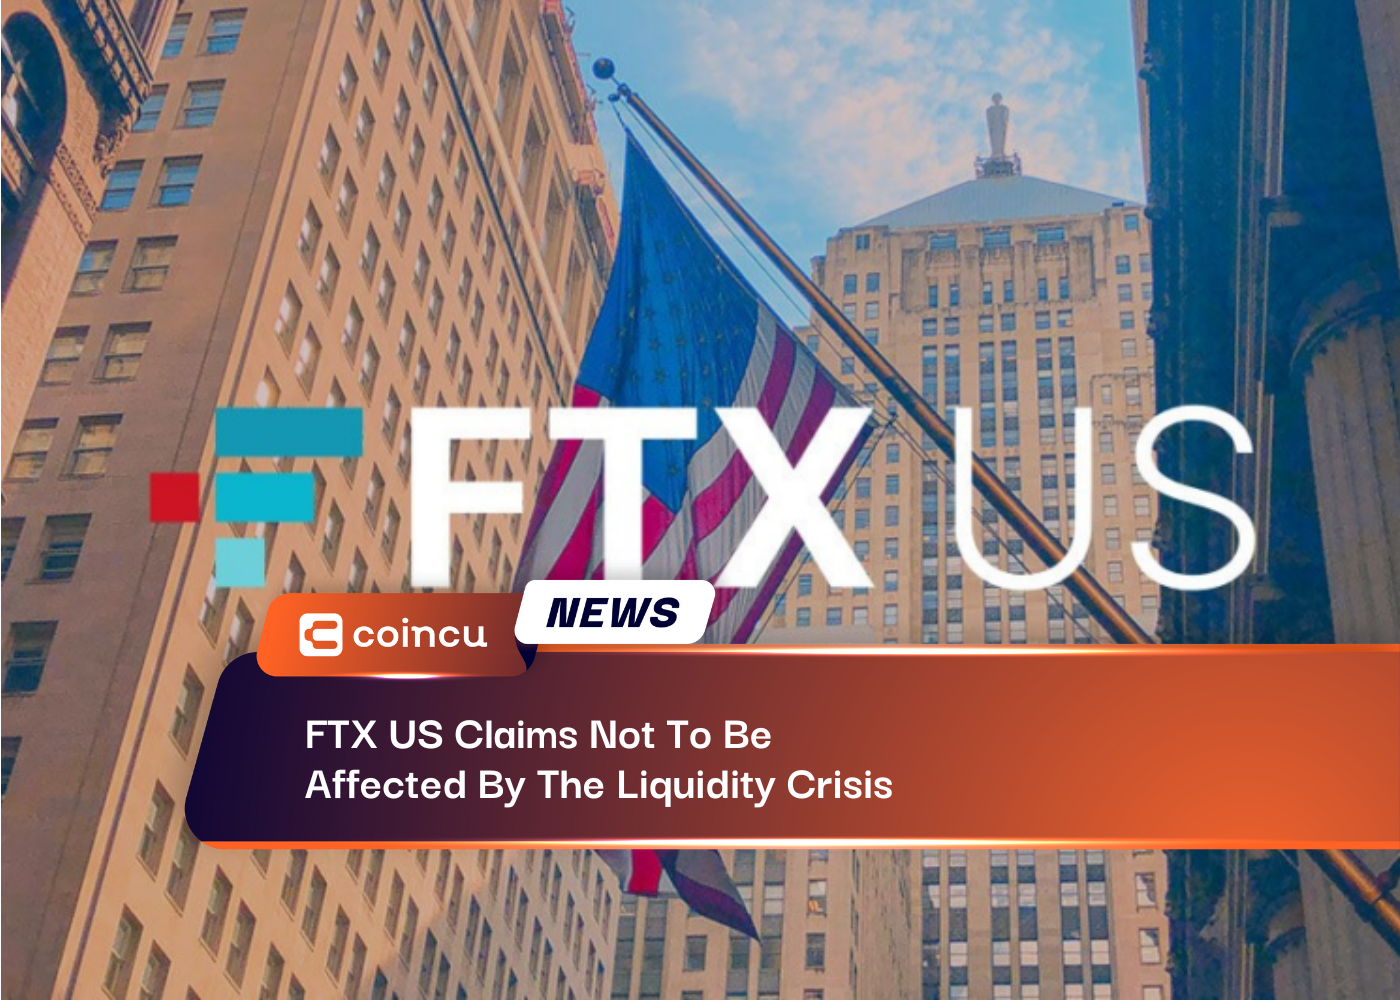 FTX US Claims Not To Be Affected By The Liquidity Crisis